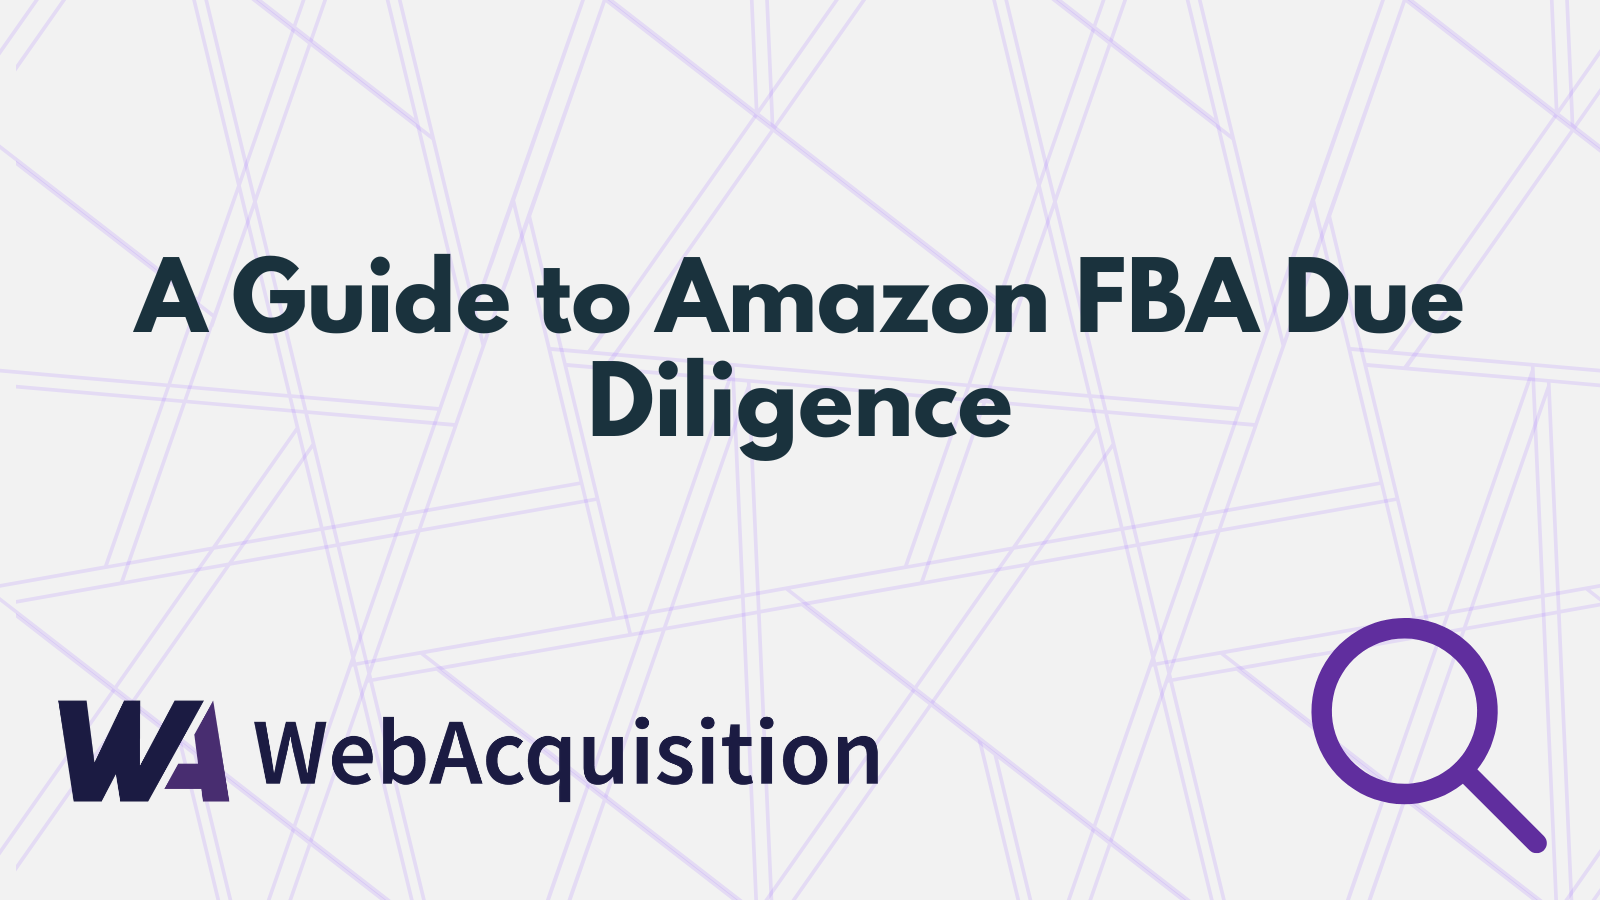 A Guide to Amazon FBA Due Diligence